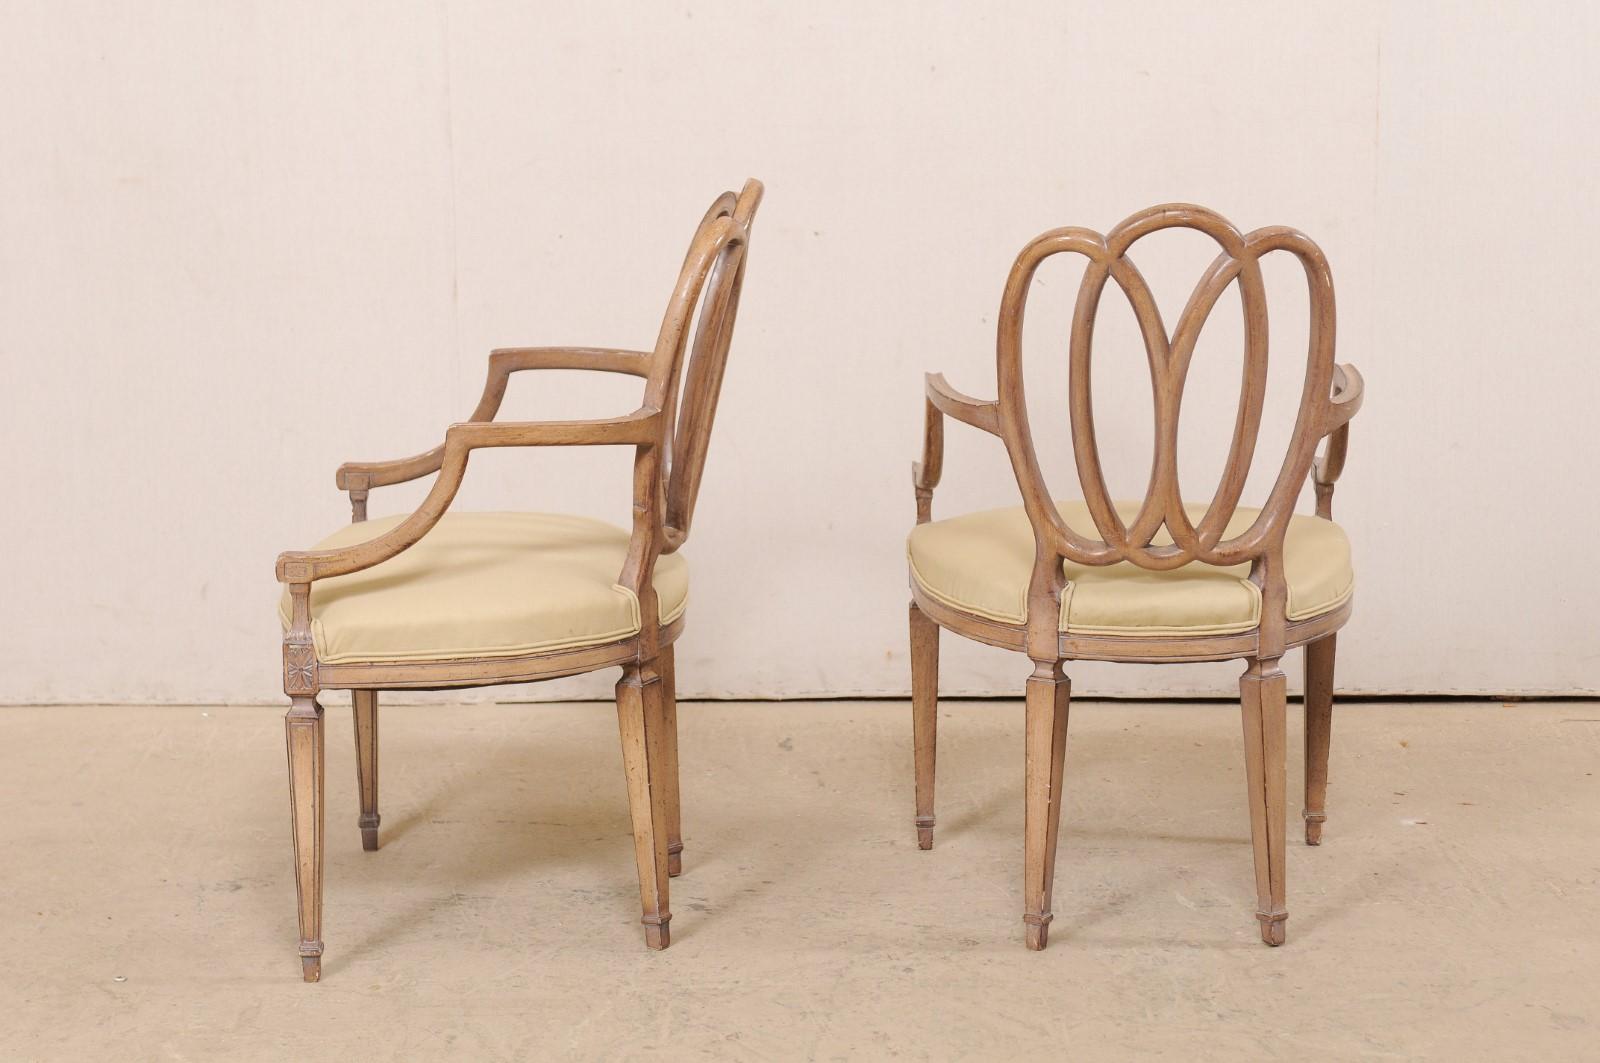 Italian Pair of Carved-Wood Armchairs with Upholstered Seats, Mid-20th Century For Sale 4